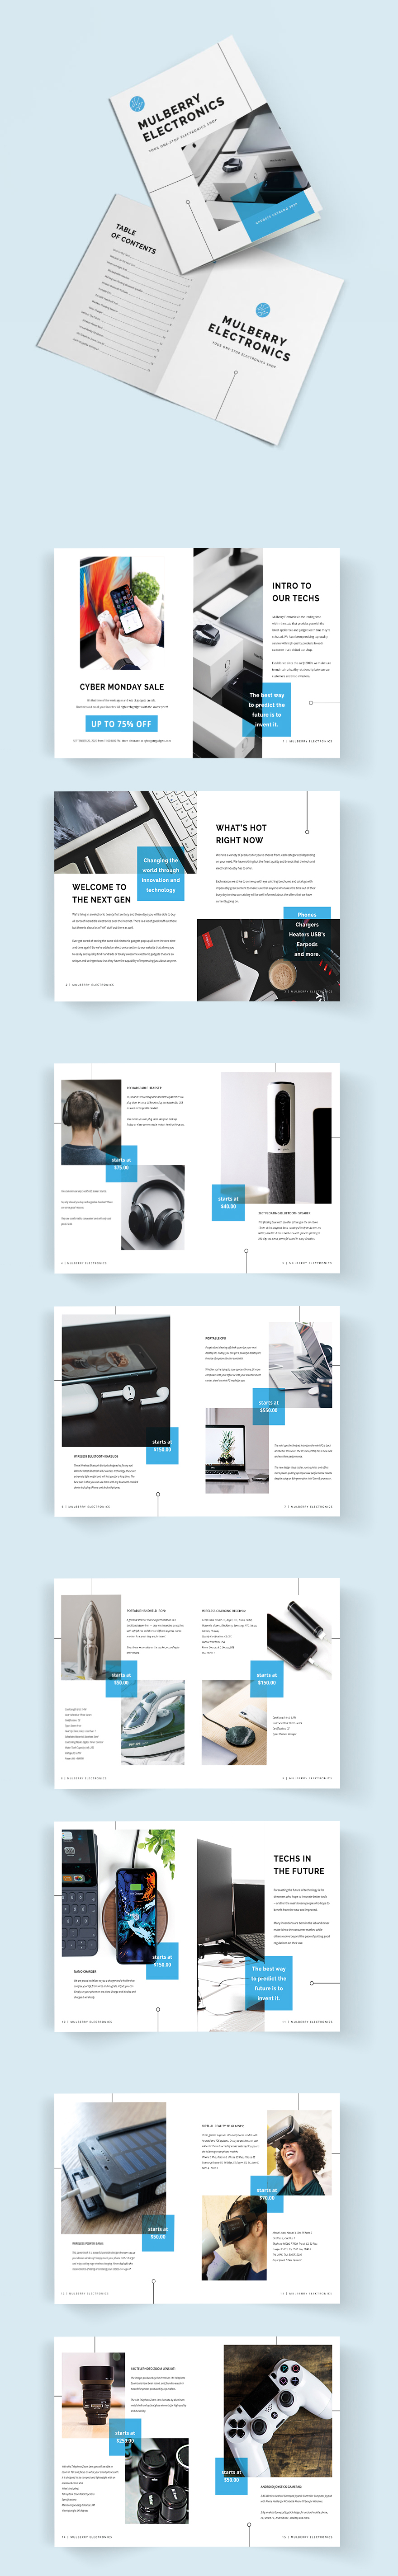 Sample Product Catalog Template